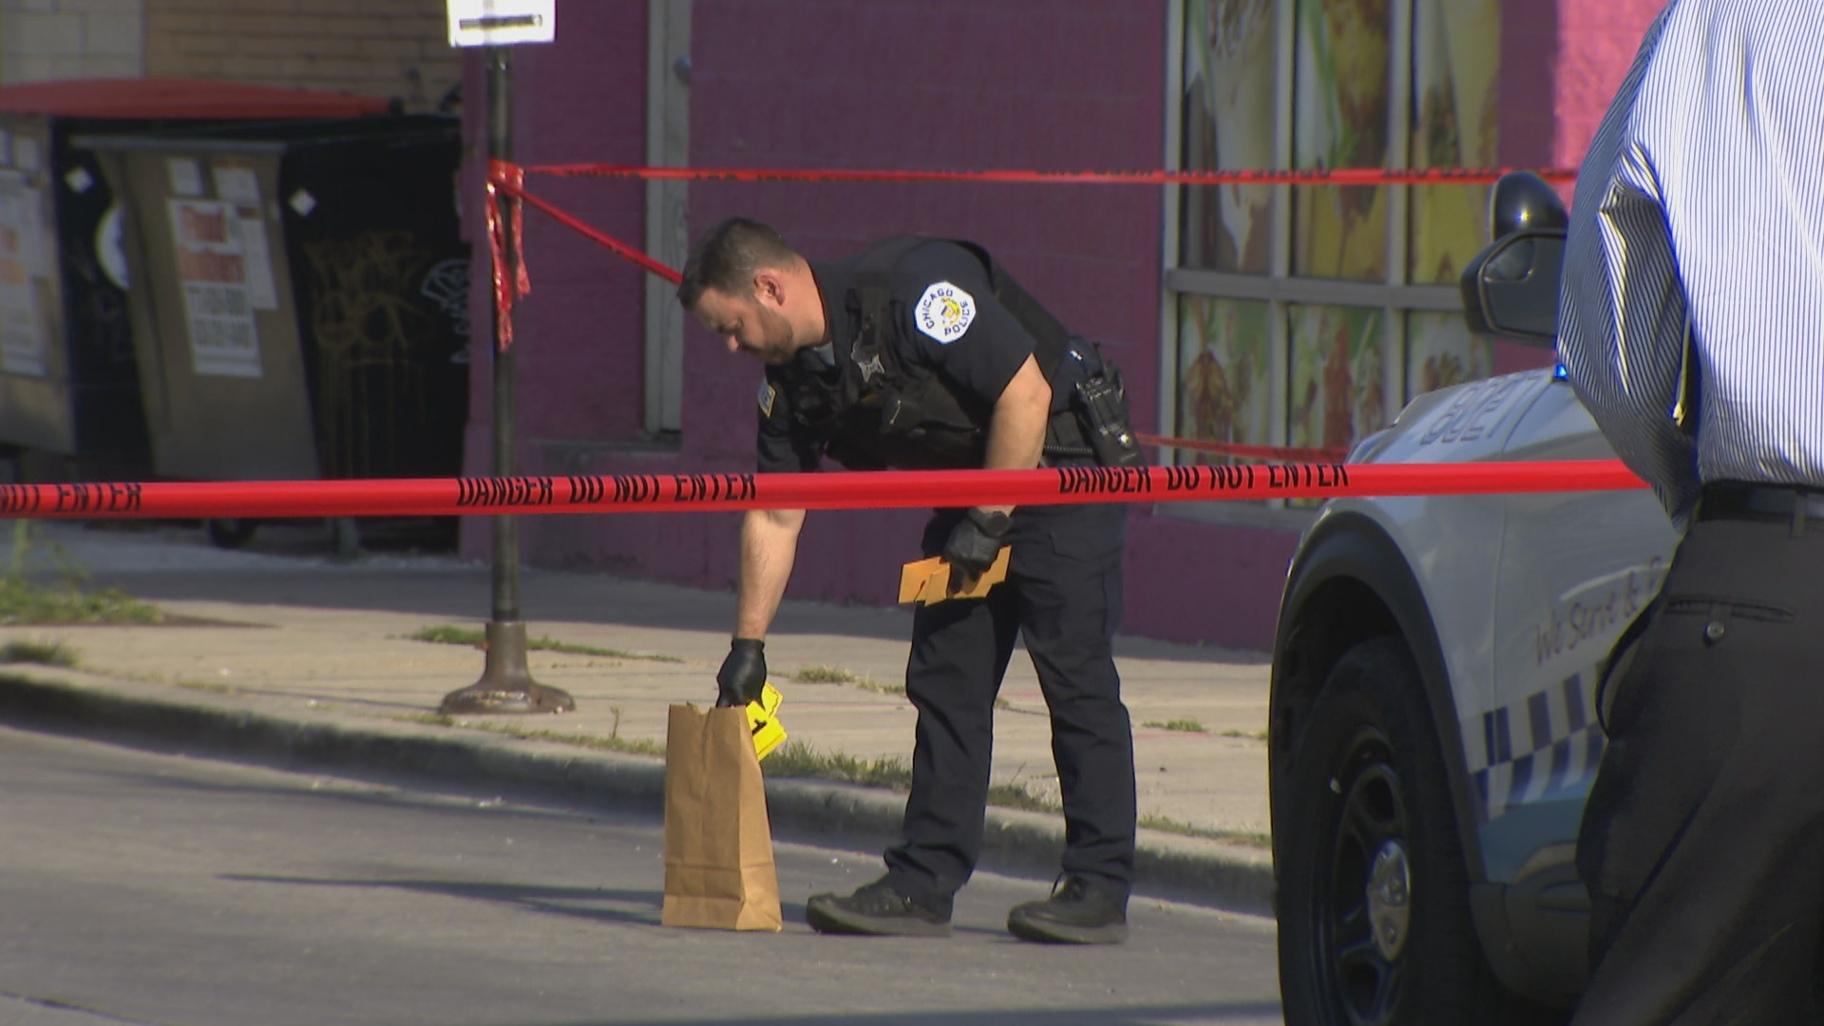 A Chicago Police officer places evidence markers at the scene of a shooting in the 4300 block of West Addison near Schurz High School on Aug. 24, 2022. (WTTW News)